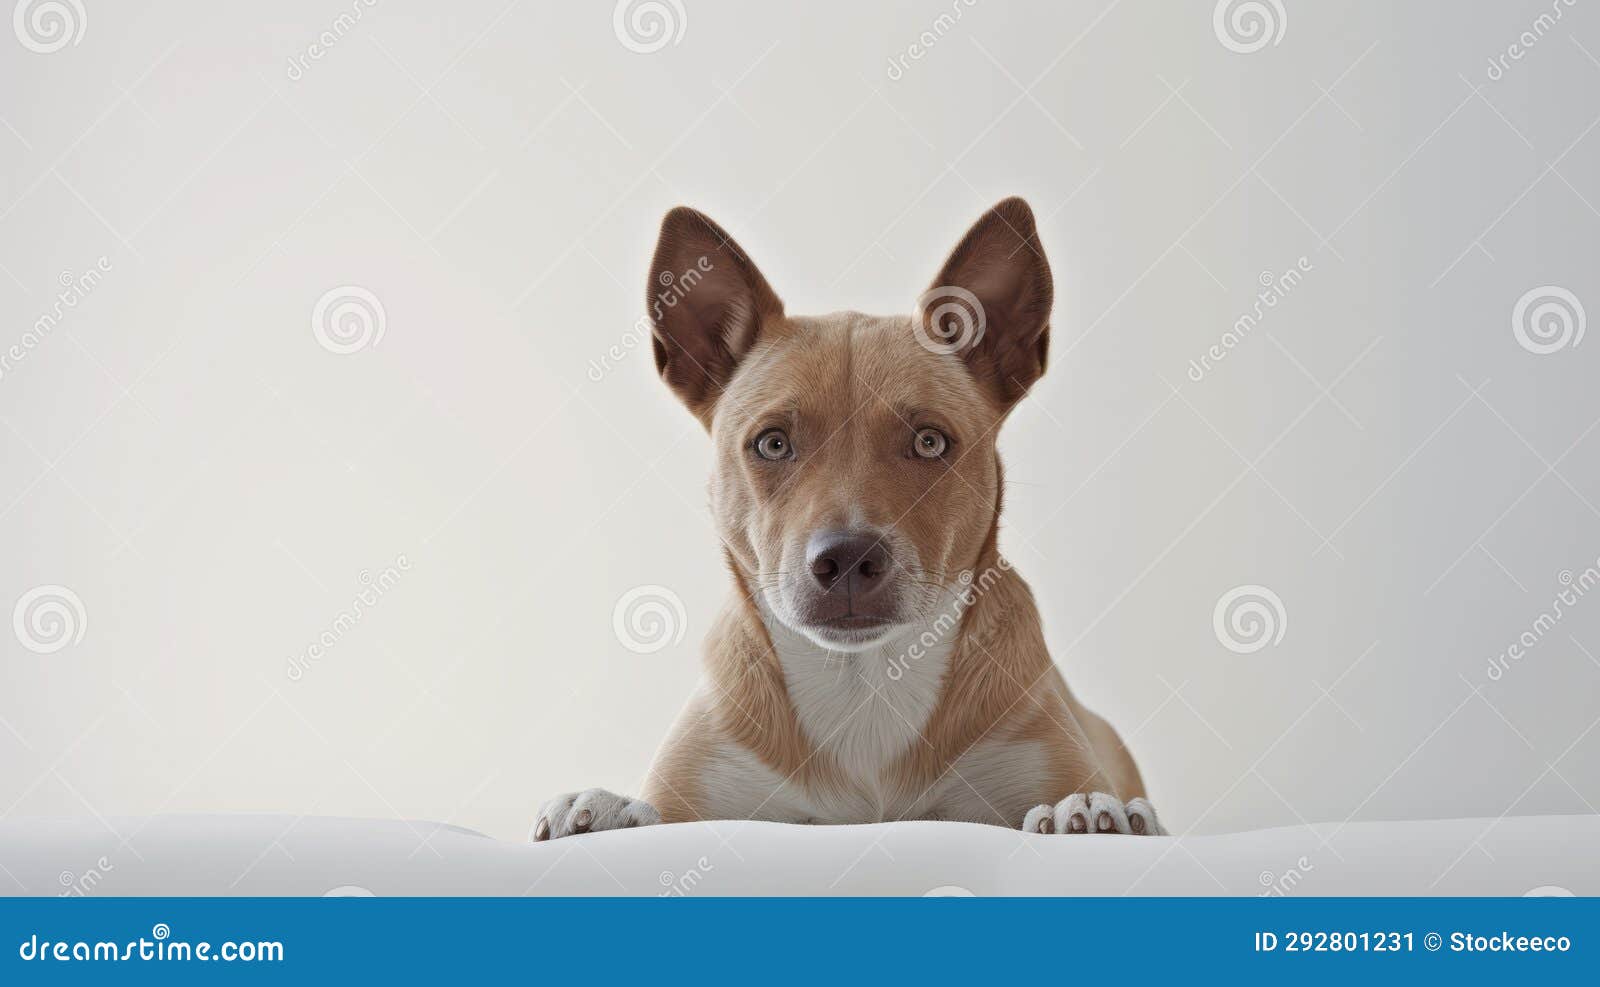 eye-catching brown and white dog on white background